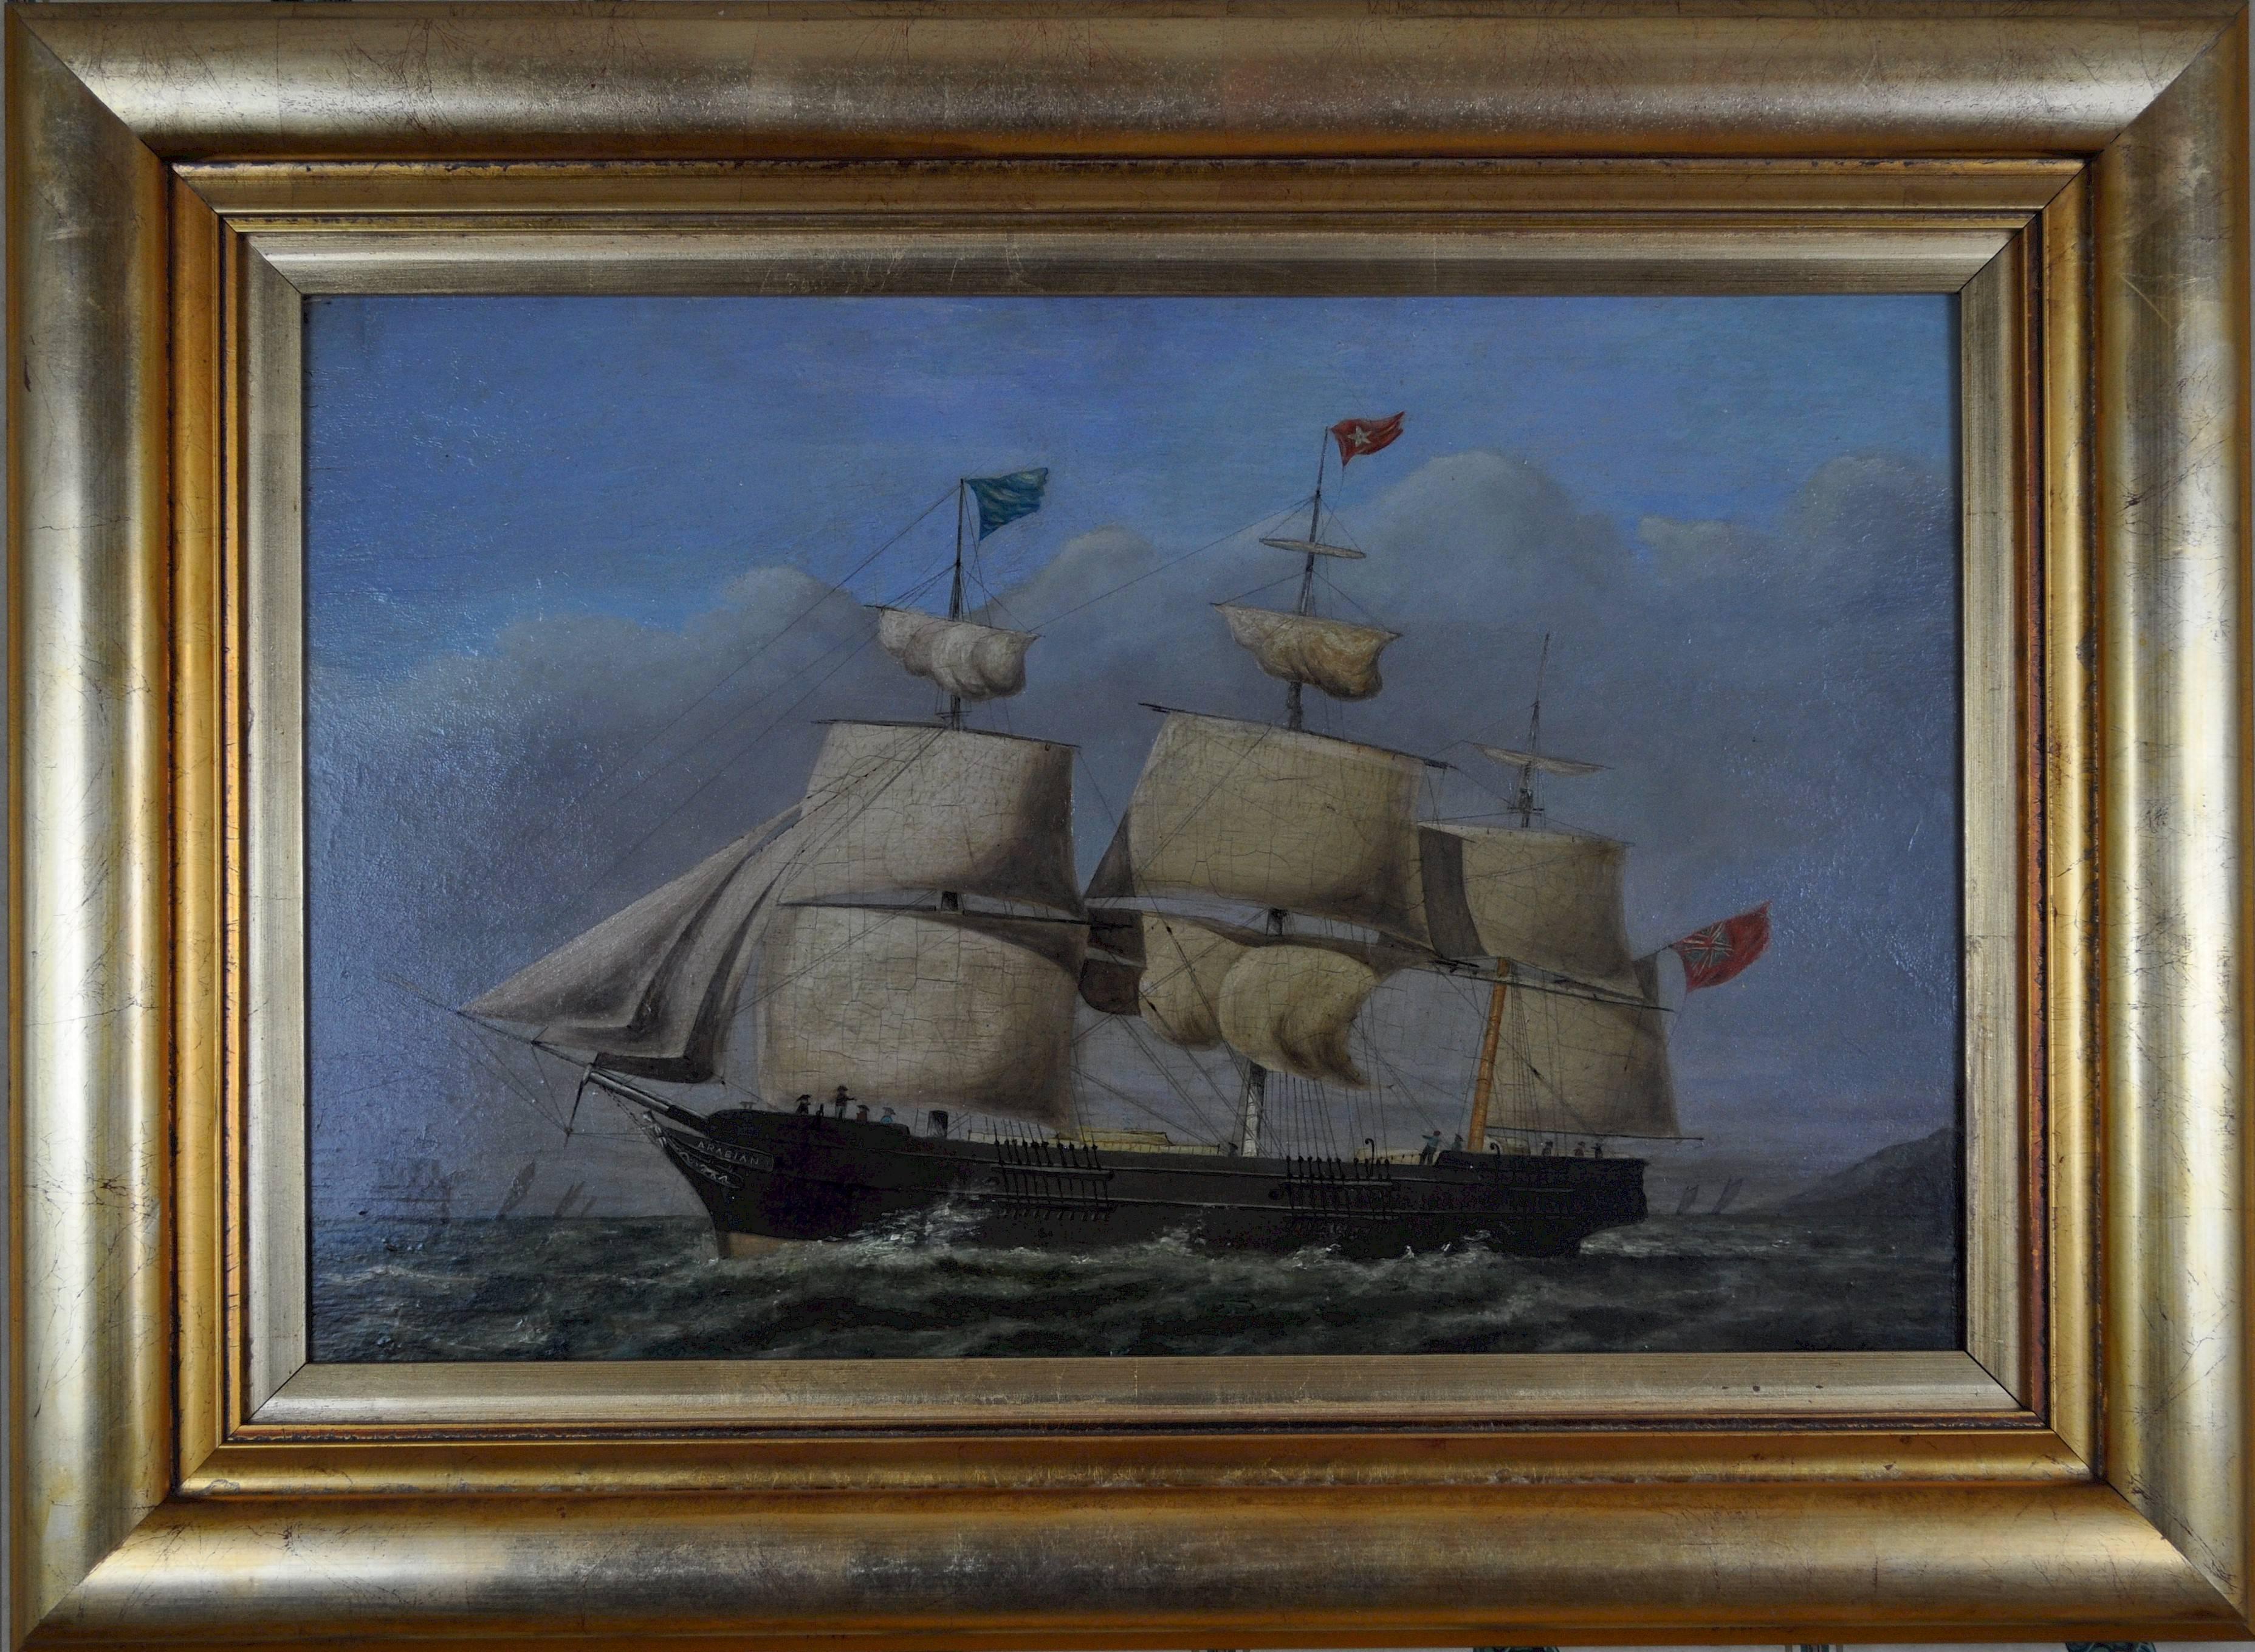 Sailing ship ‘Arabian’ off a headland - Painting by Unknown